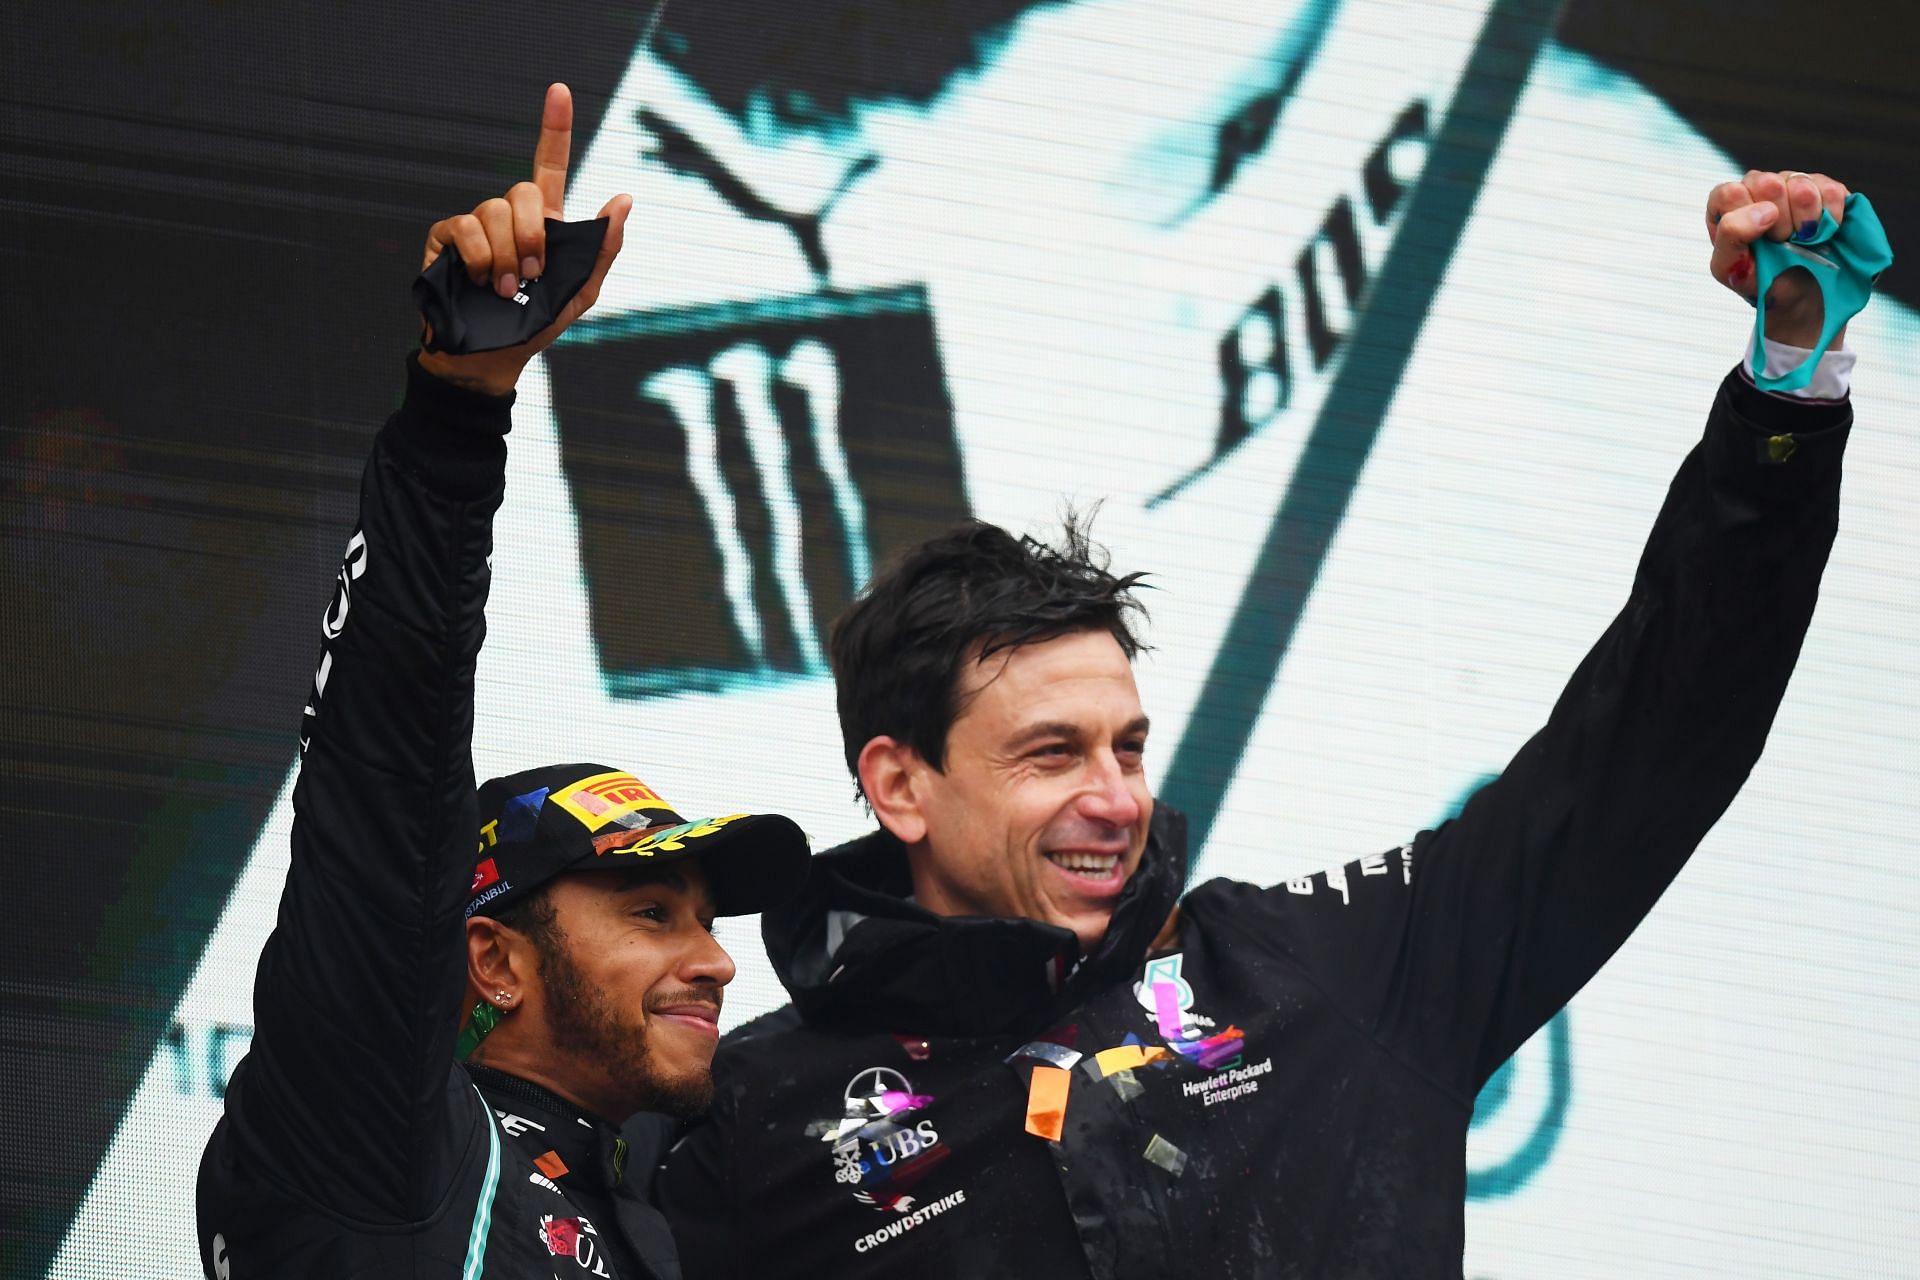 F1 Grand Prix of Turkey - Hamilton (left) celebrates with Wolff (right) (Photo by Clive Mason/Getty Images)